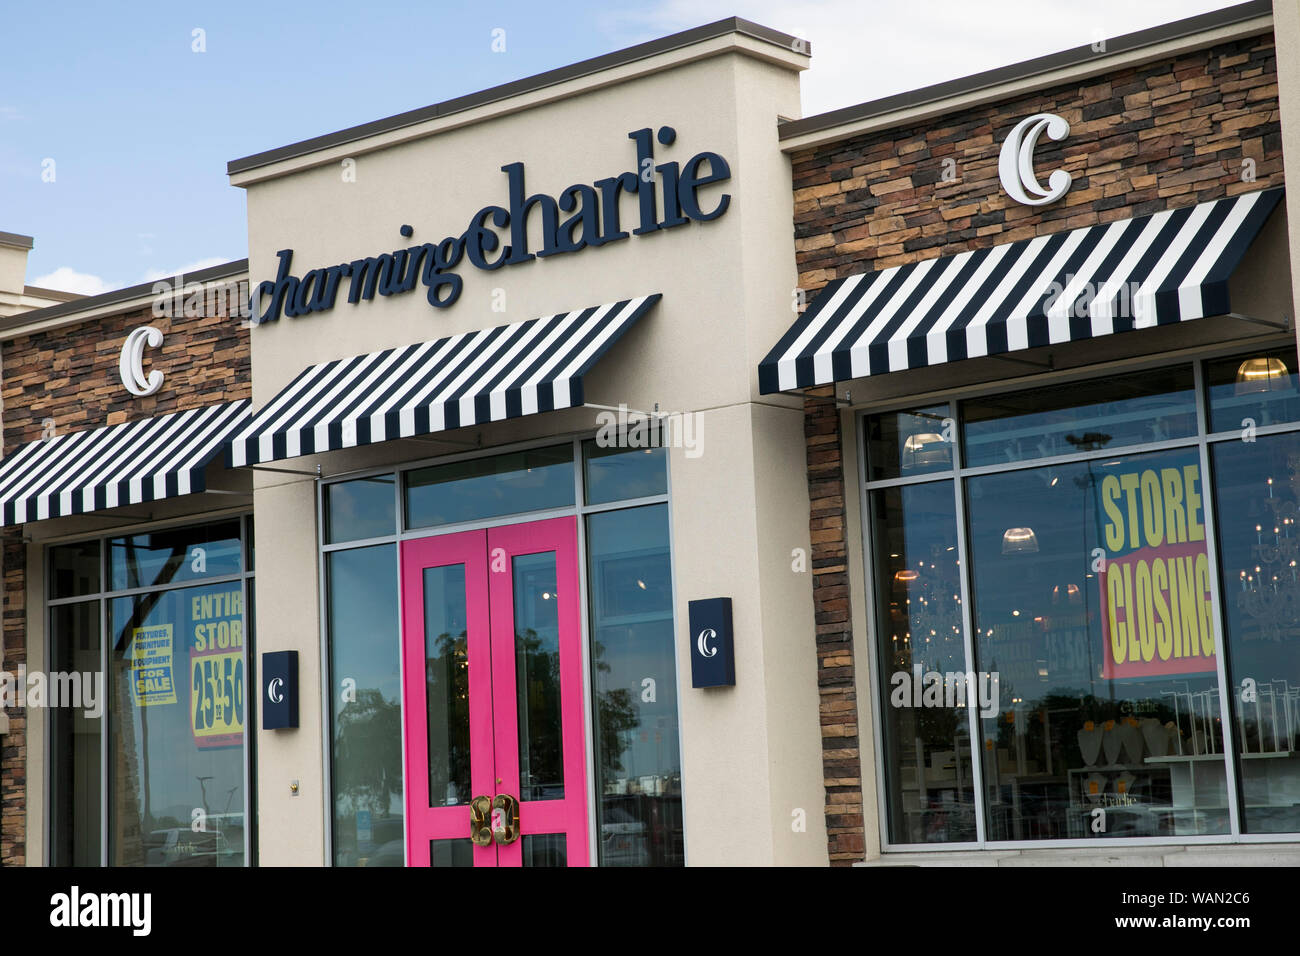 A logo and 'store closing' signs outside of a Charming Charlie retail store location in Orem, Utah on July 29, 2019. Stock Photo